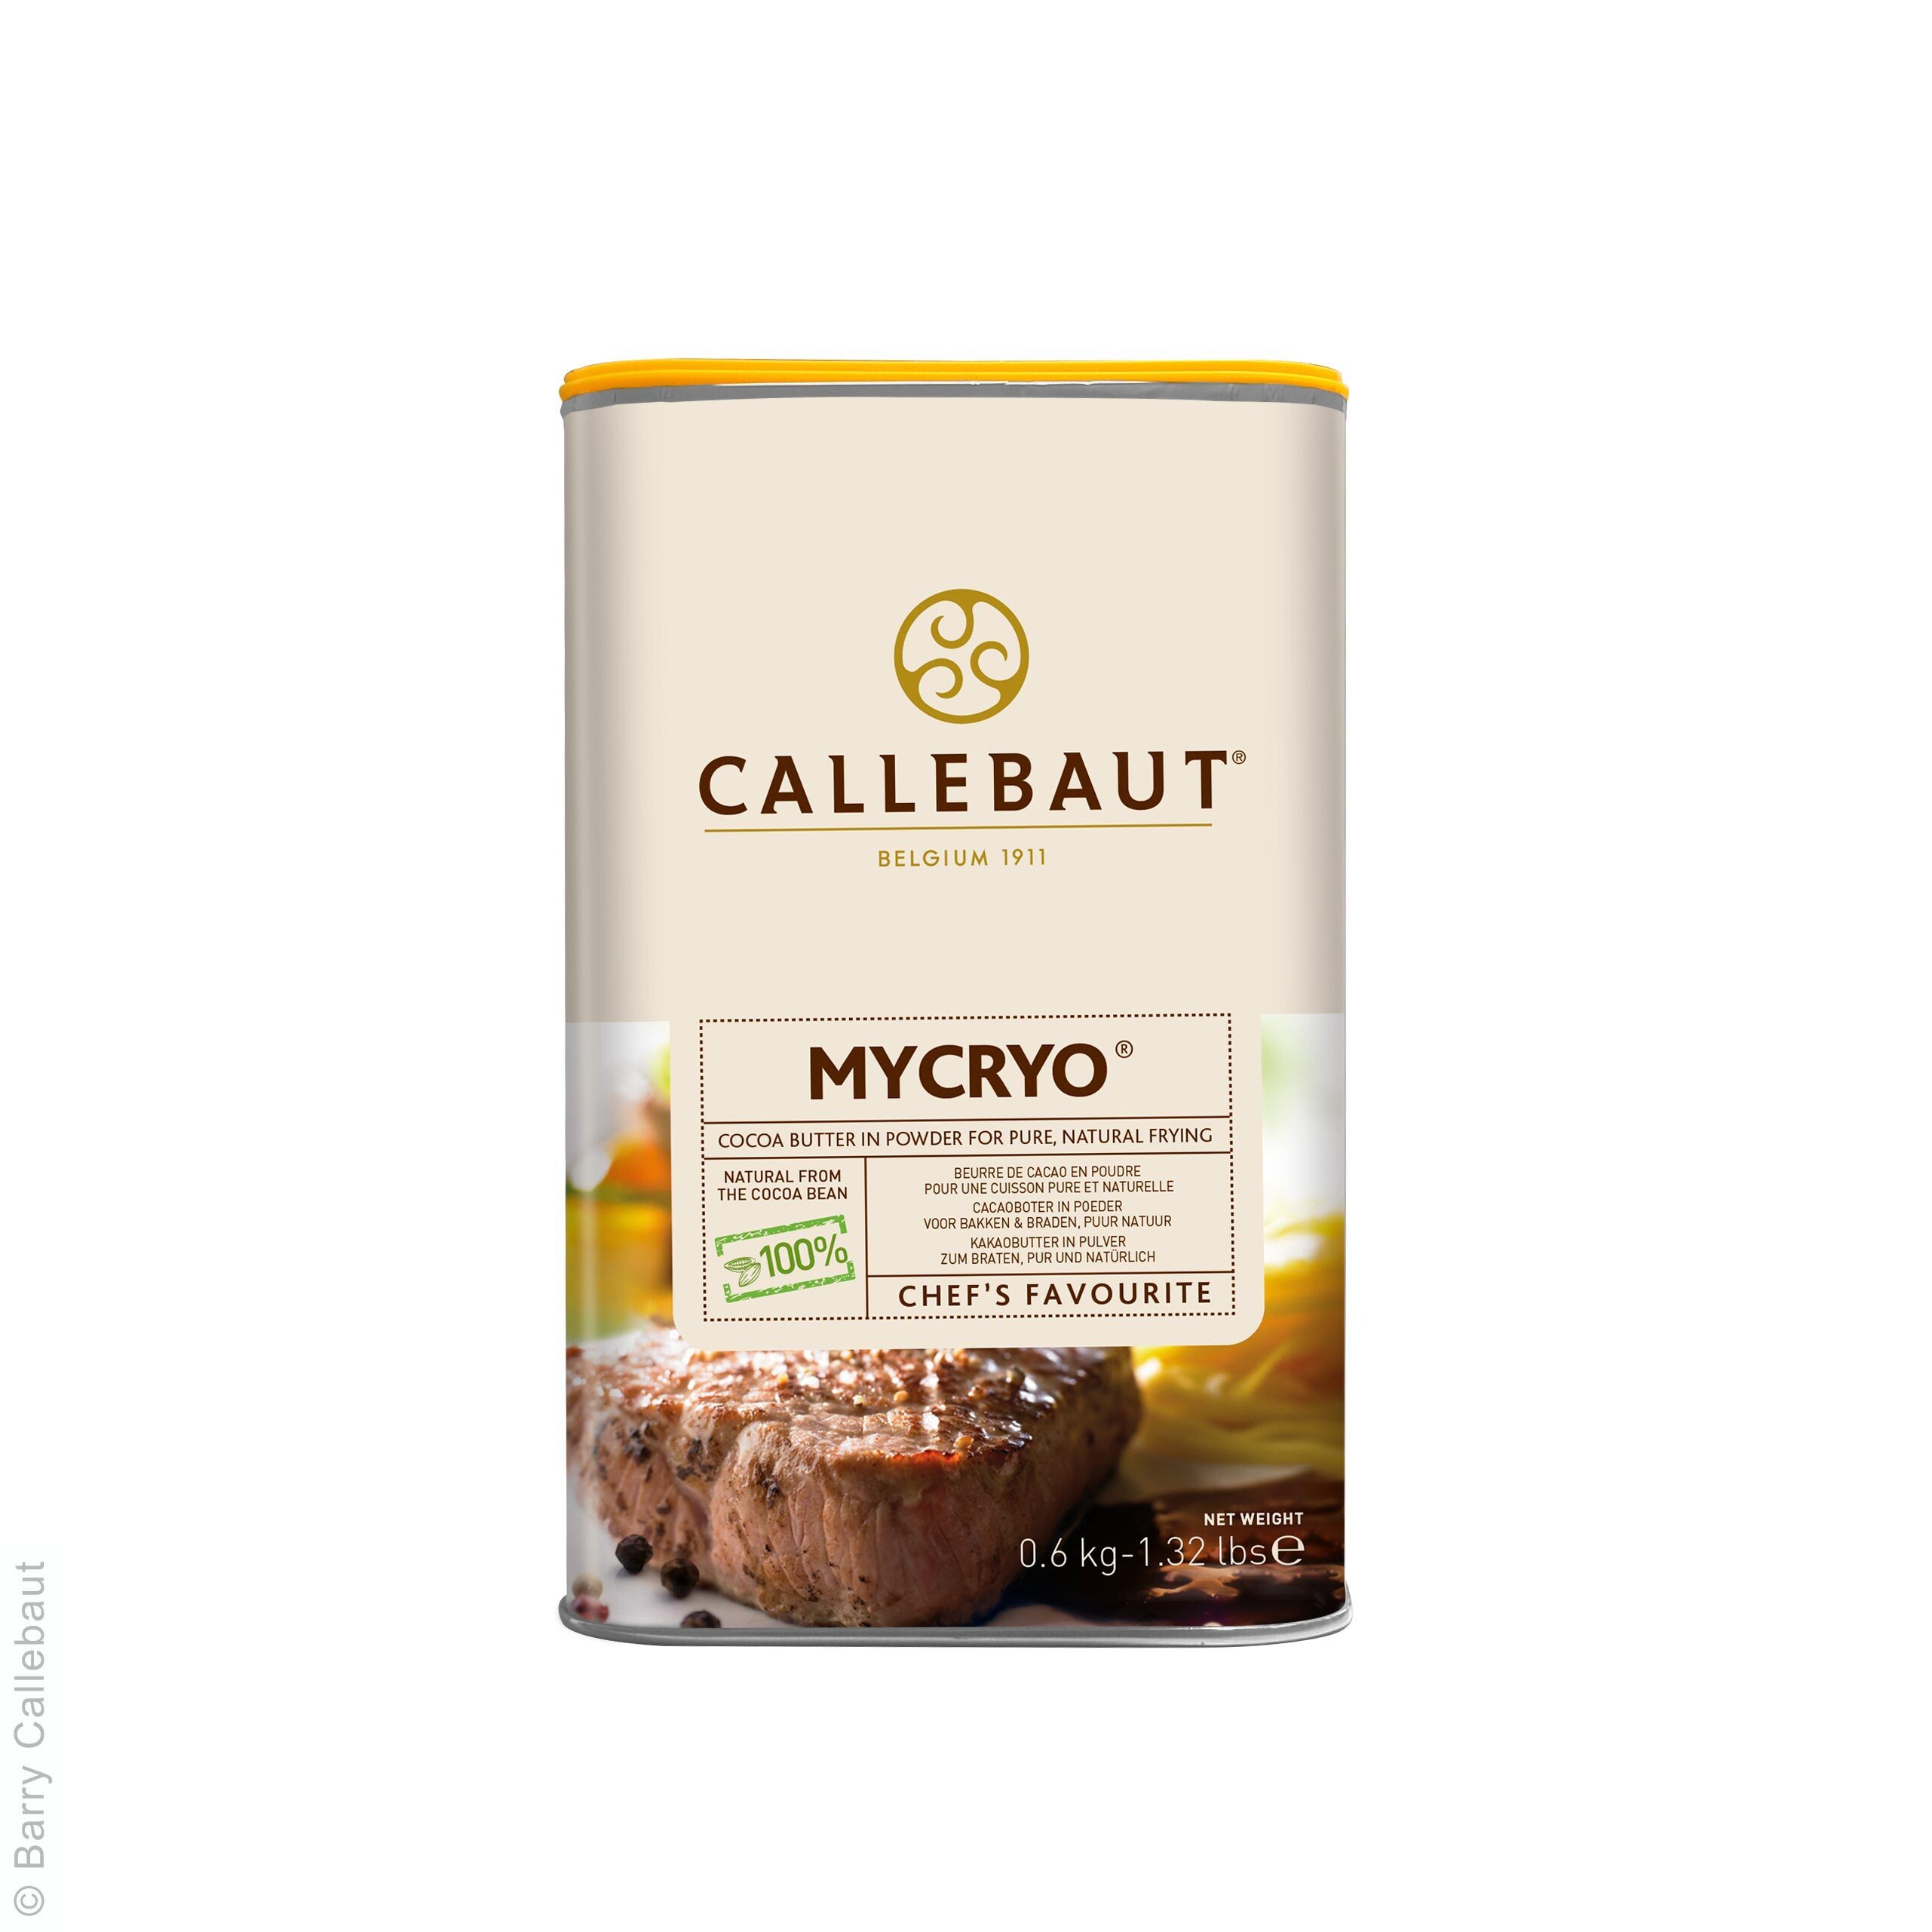 Barry Callebaut Mycryo 0.6kg 1.32lbs cocoa butter